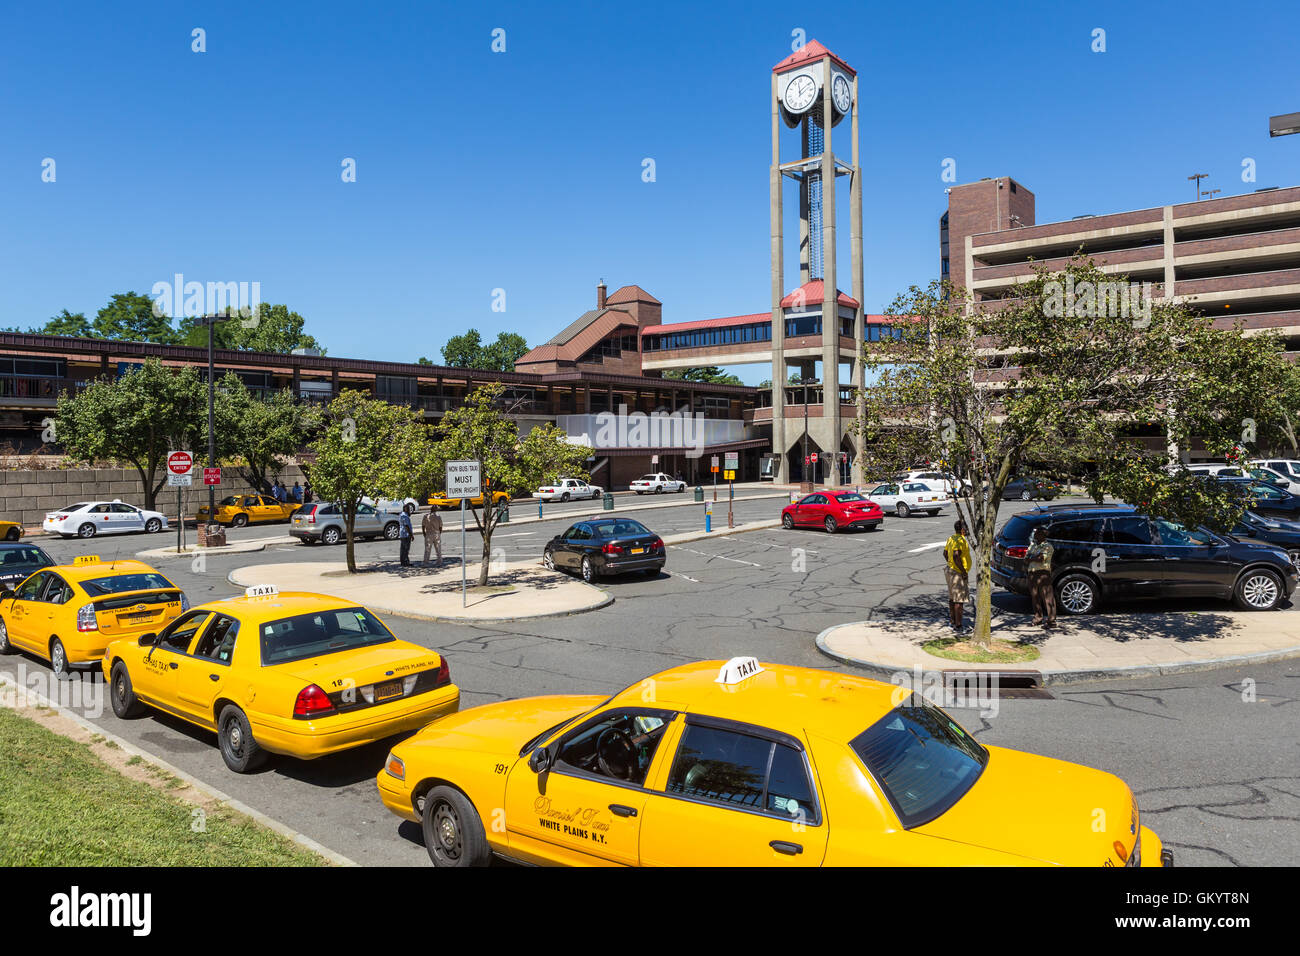 Taxis wait for passengers in the taxi line outside the White Plains Metro-North Railroad station in White Plains, New York. Stock Photo